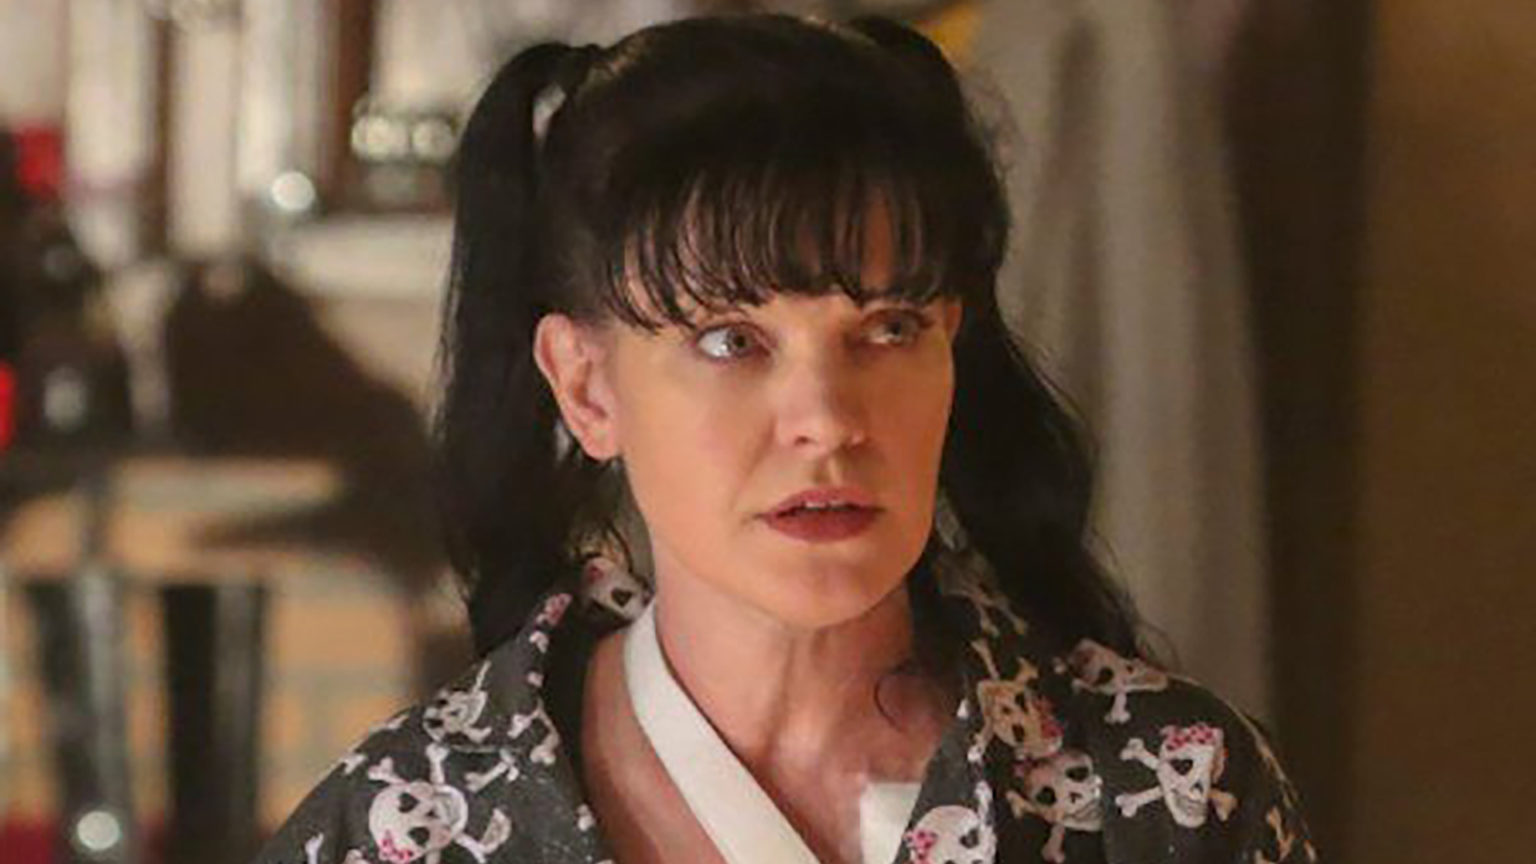 Pauley Perrette Of Ncis Claims She ‘cheated Death’ By Opening Up About Her Stroke Ordeal